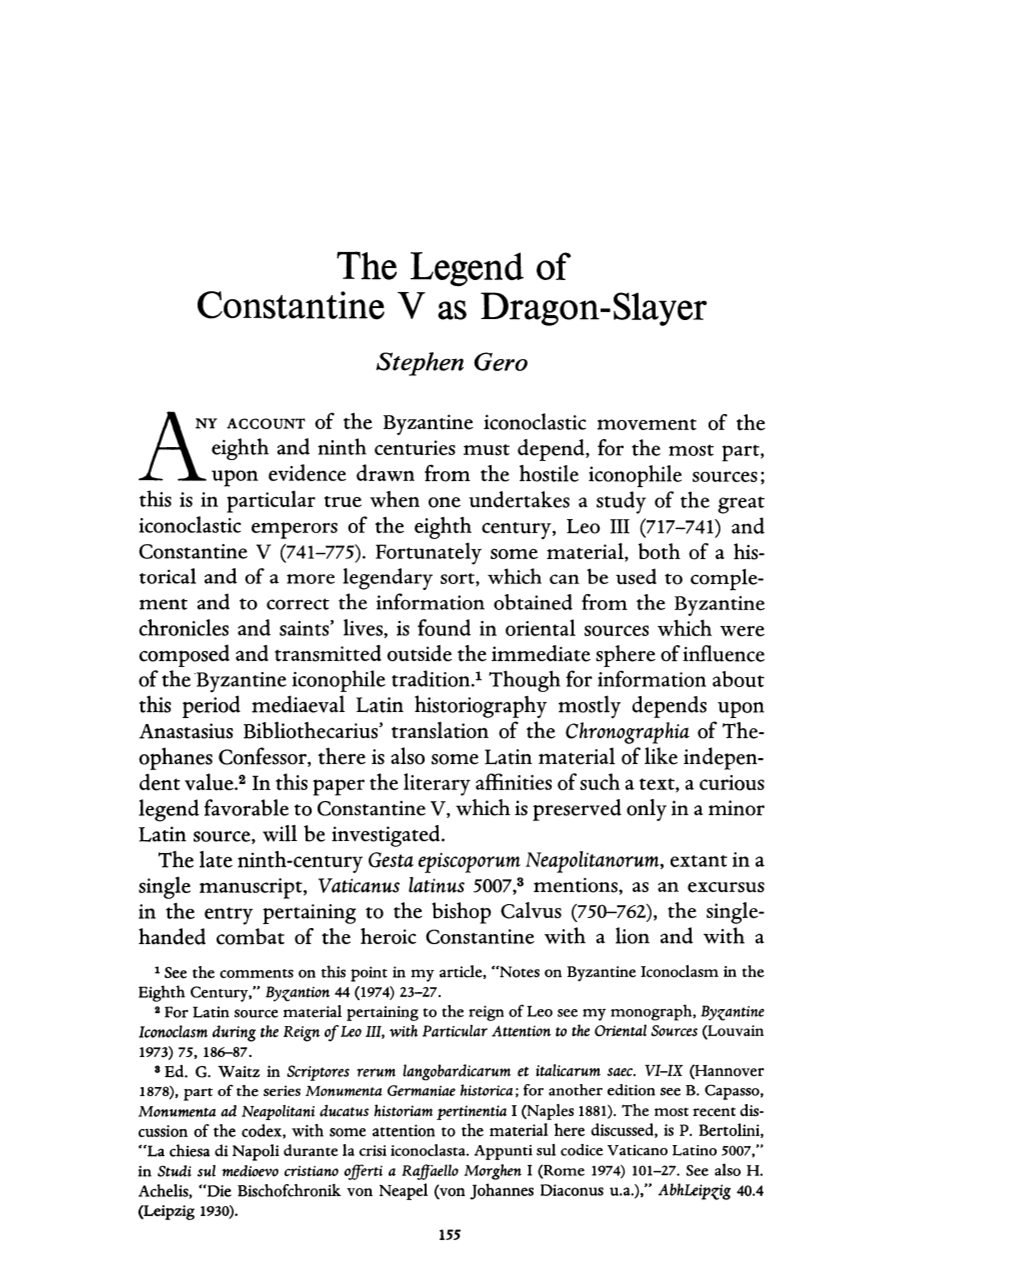 The Legend of Constantine V As Dragon-Slayer Gero, Stephen Greek, Roman and Byzantine Studies; Jan 1, 1978; 19, 2; Periodicals Archive Online Pg